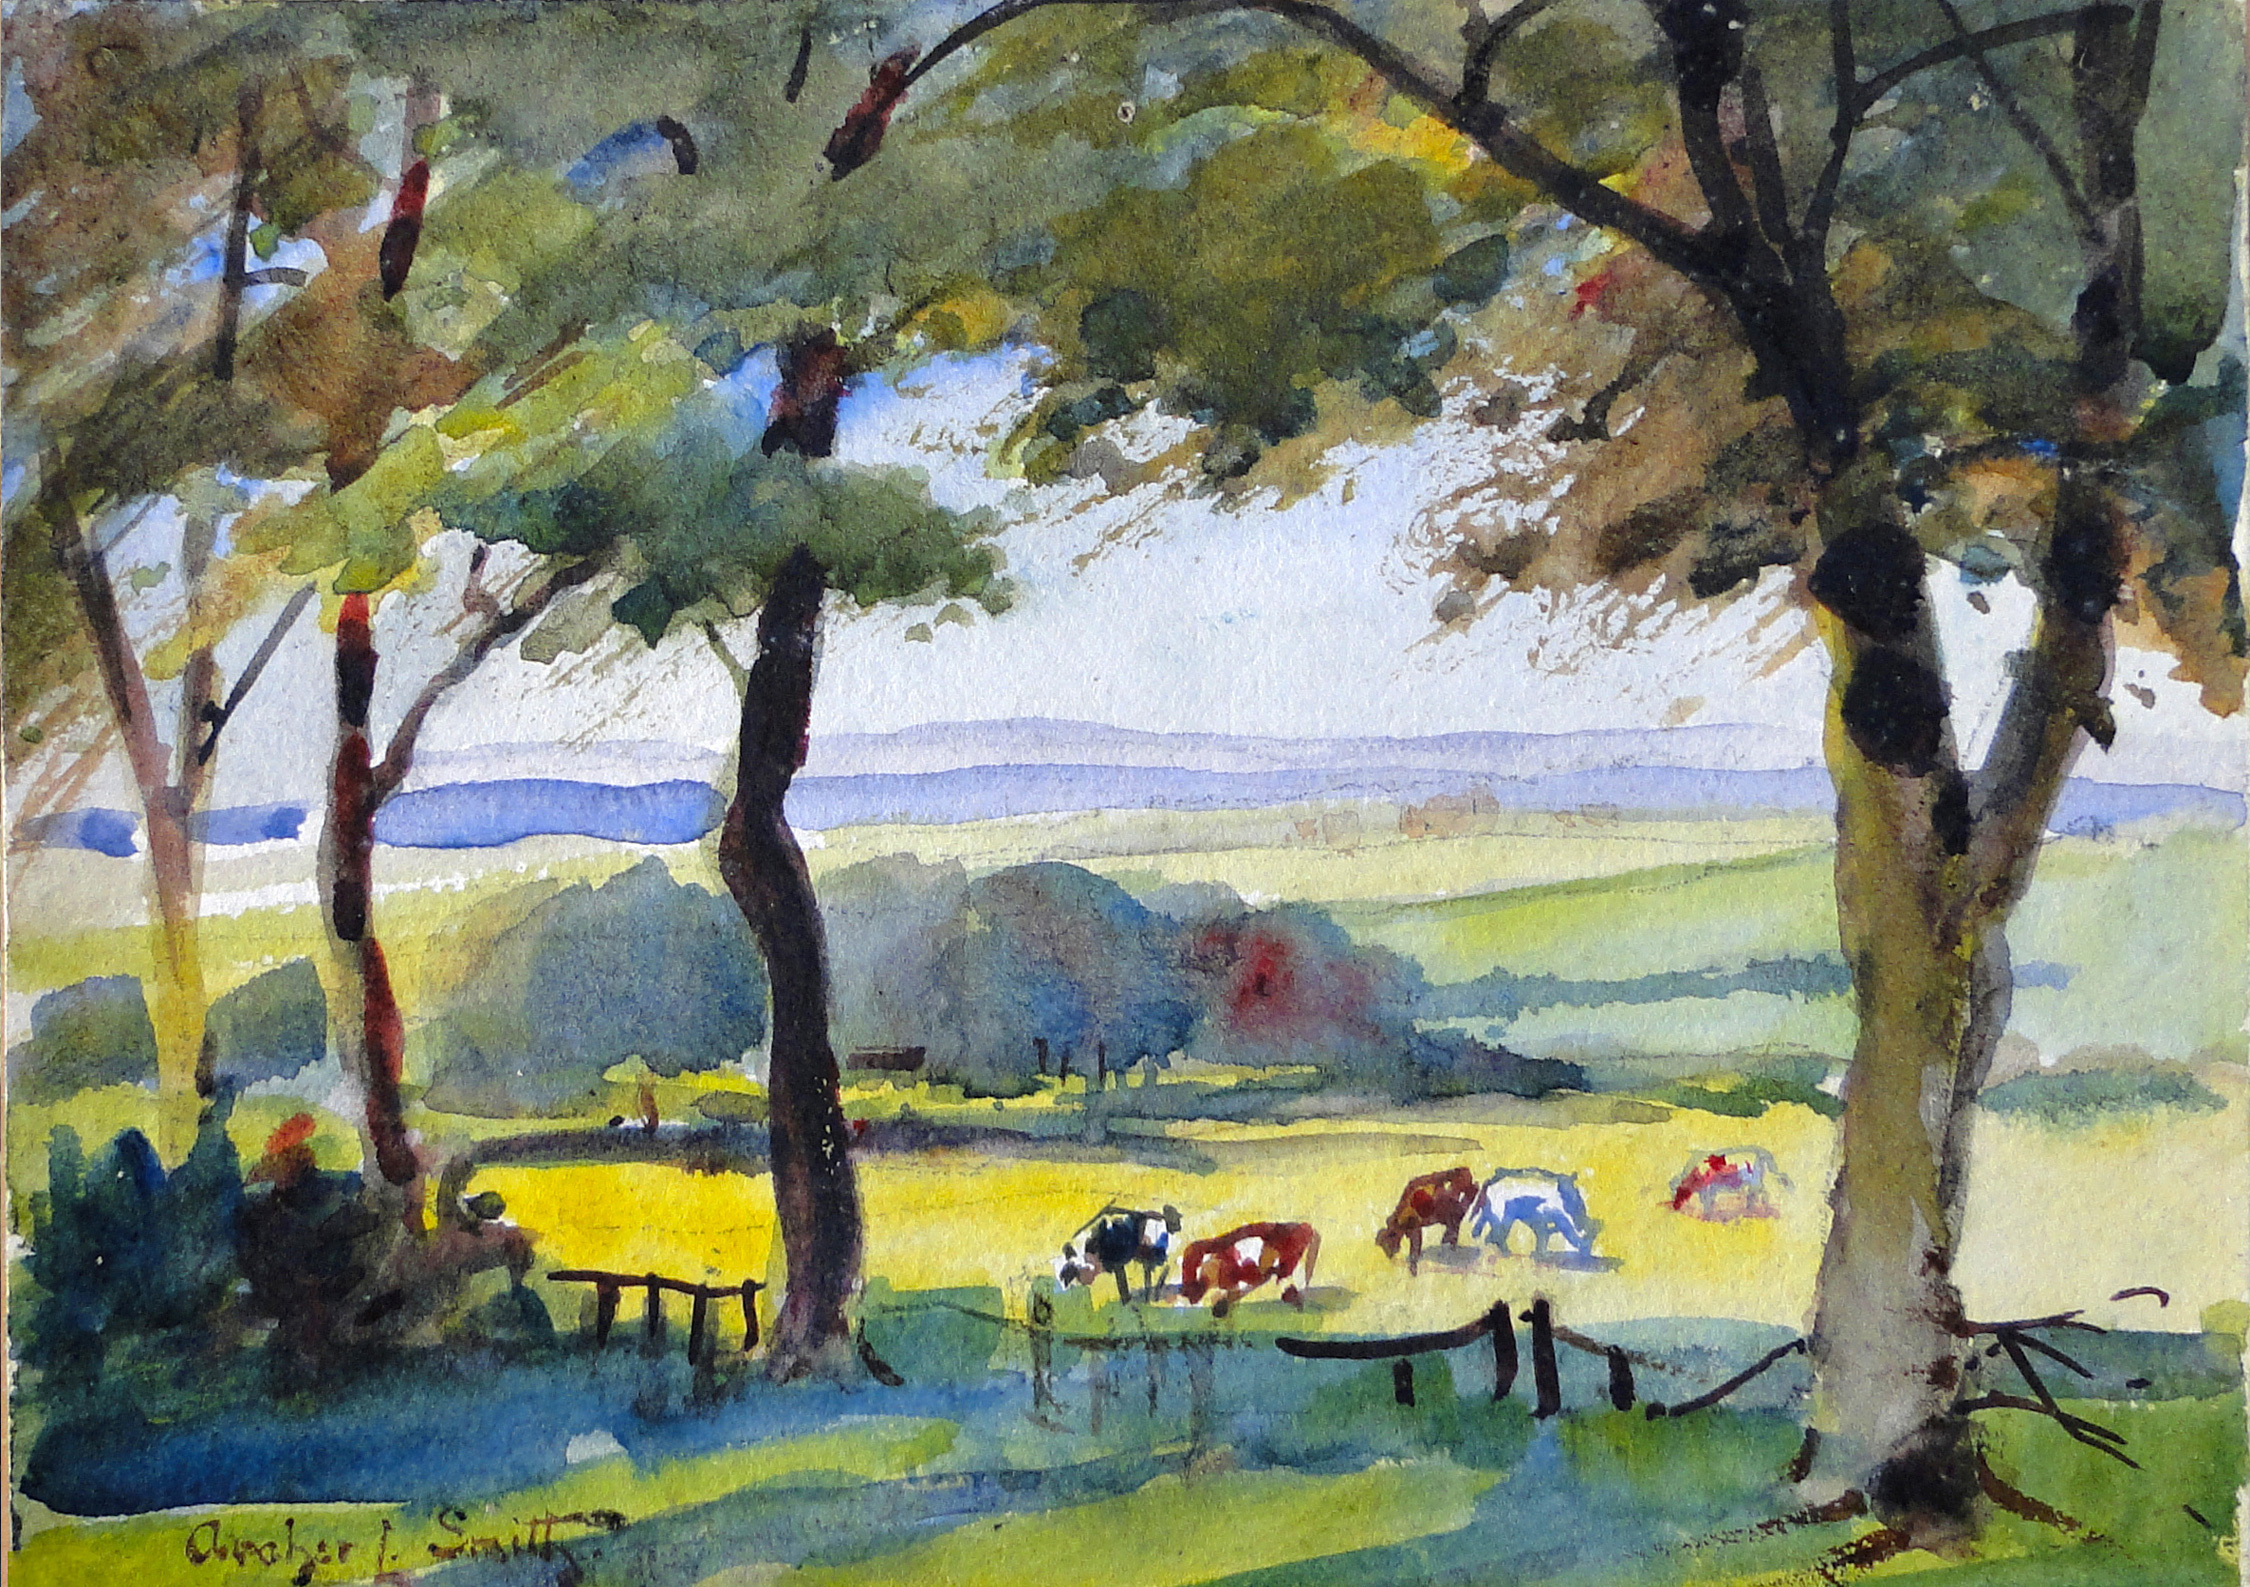 English Countryside by Archer L Smith